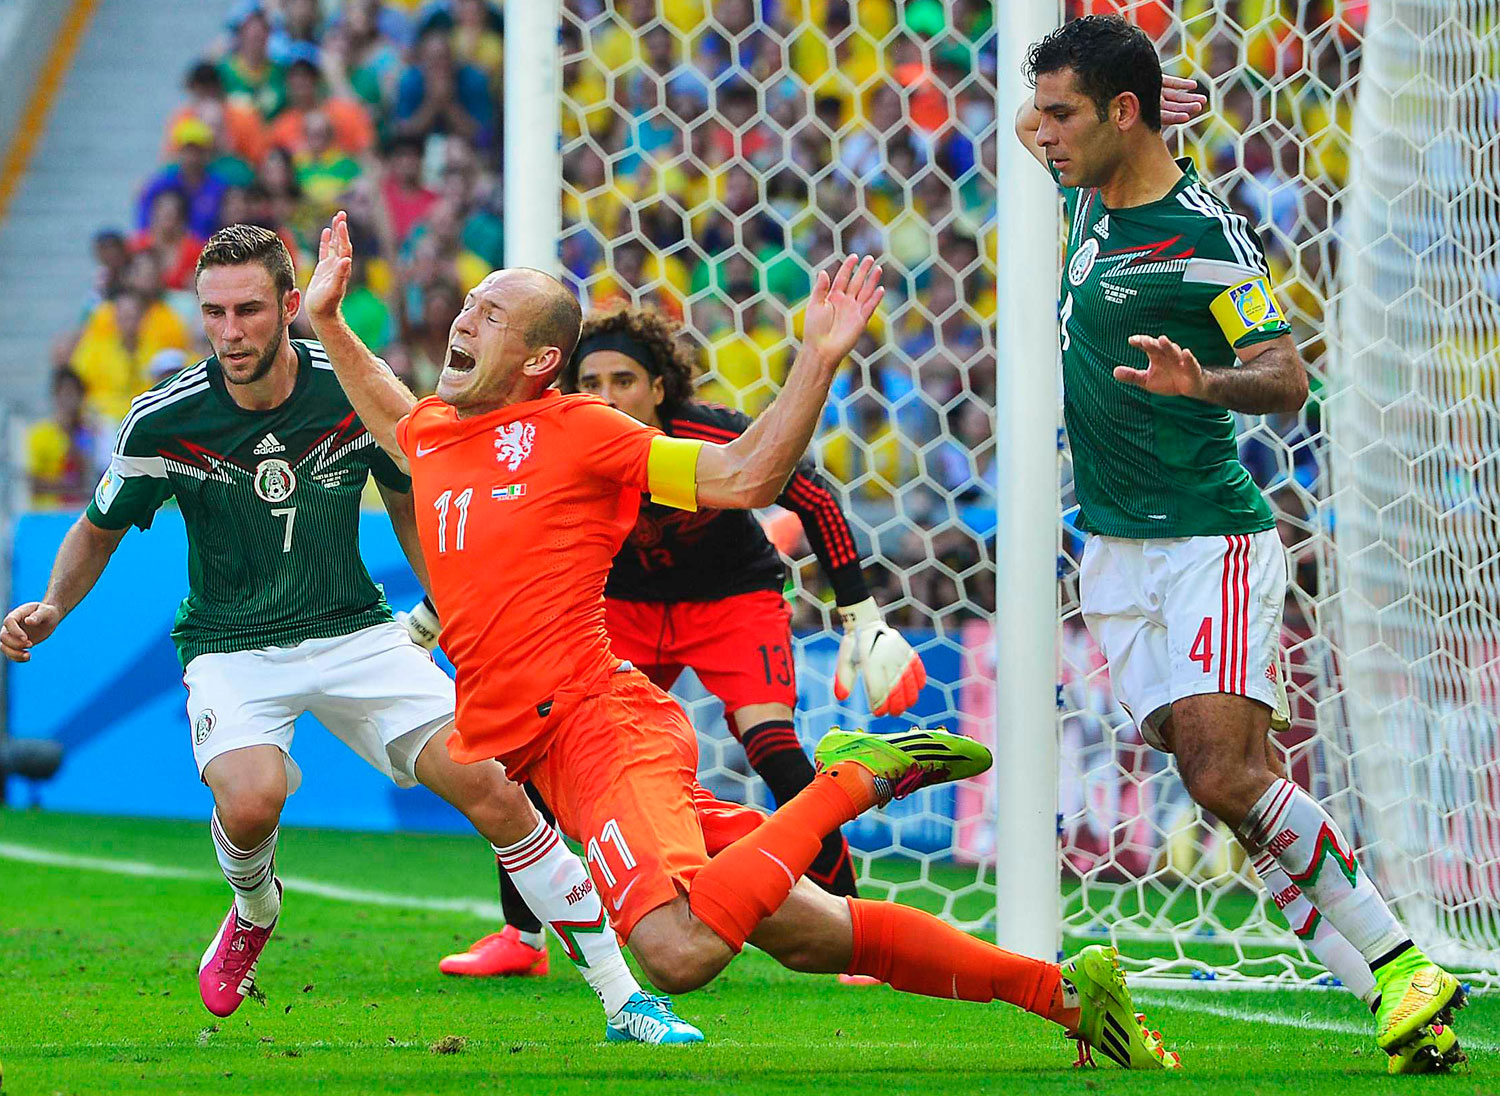 Mexico's Rafael Marquez fouls Arjen Robben of the Netherlands in the box at the Estadio Castelao in Fortaleza, Brazil on June 29, 2014.